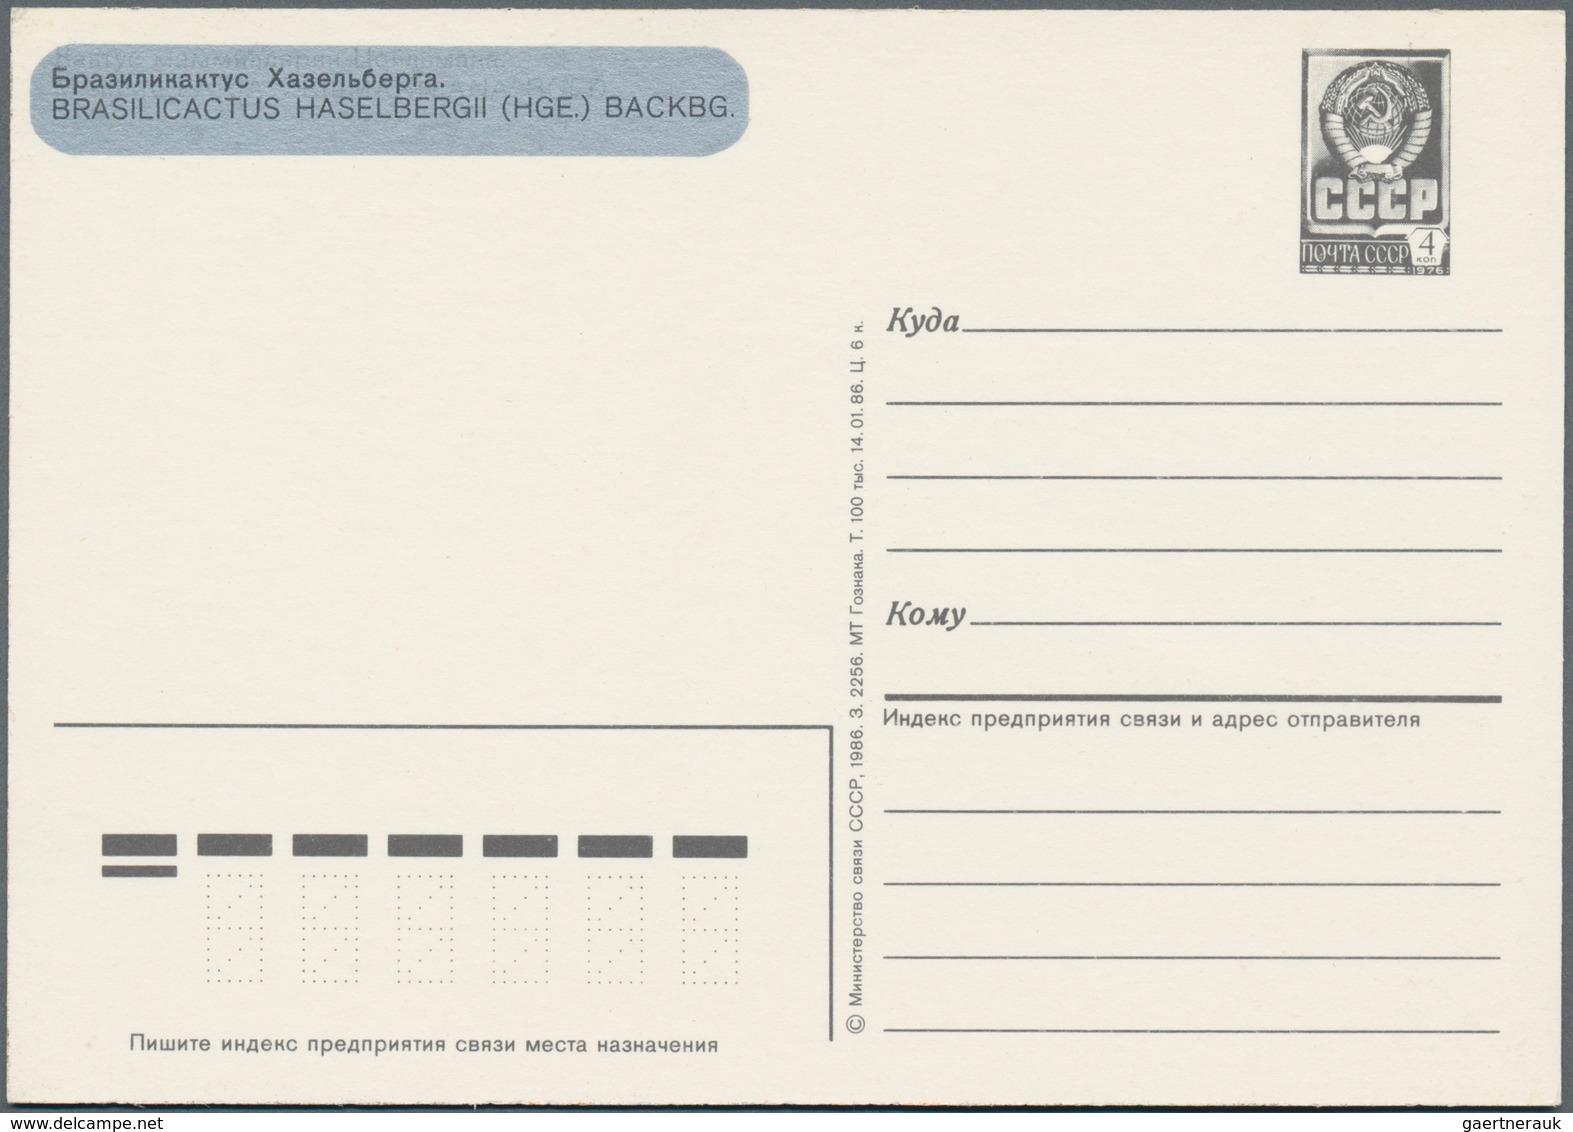 Sowjetunion - Ganzsachen: 1962/90 holding of about 650 postal stationery cards, mostly unused pictur